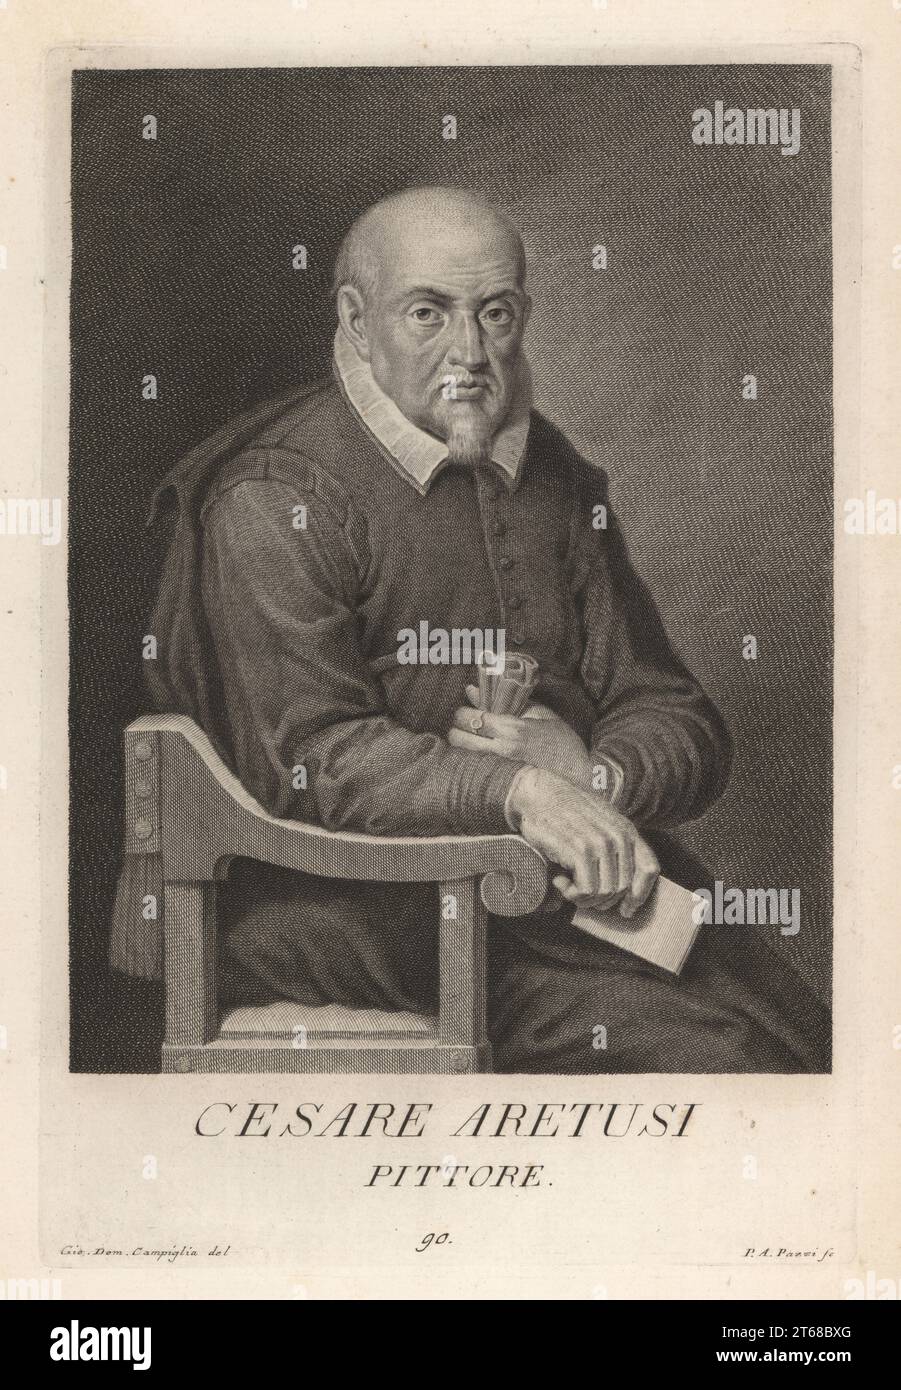 Cesare Aretusi, Italian painter of the late-Renaissance period, 1549-1612. Native of Bologna, paintings in S. Benedetto, S. Francesco, and S. Giovanni. Cesare Aretusi, Pittore. Copperplate engraving by Pietro Antonio Pazzi after Giovanni Domenico Campiglia after a self portrait by the artist from Francesco Moucke's Museo Florentino (Museum Florentinum), Serie di Ritratti de Pittori (Series of Portraits of Painters) stamperia Mouckiana, Florence, 1752-62. Stock Photo